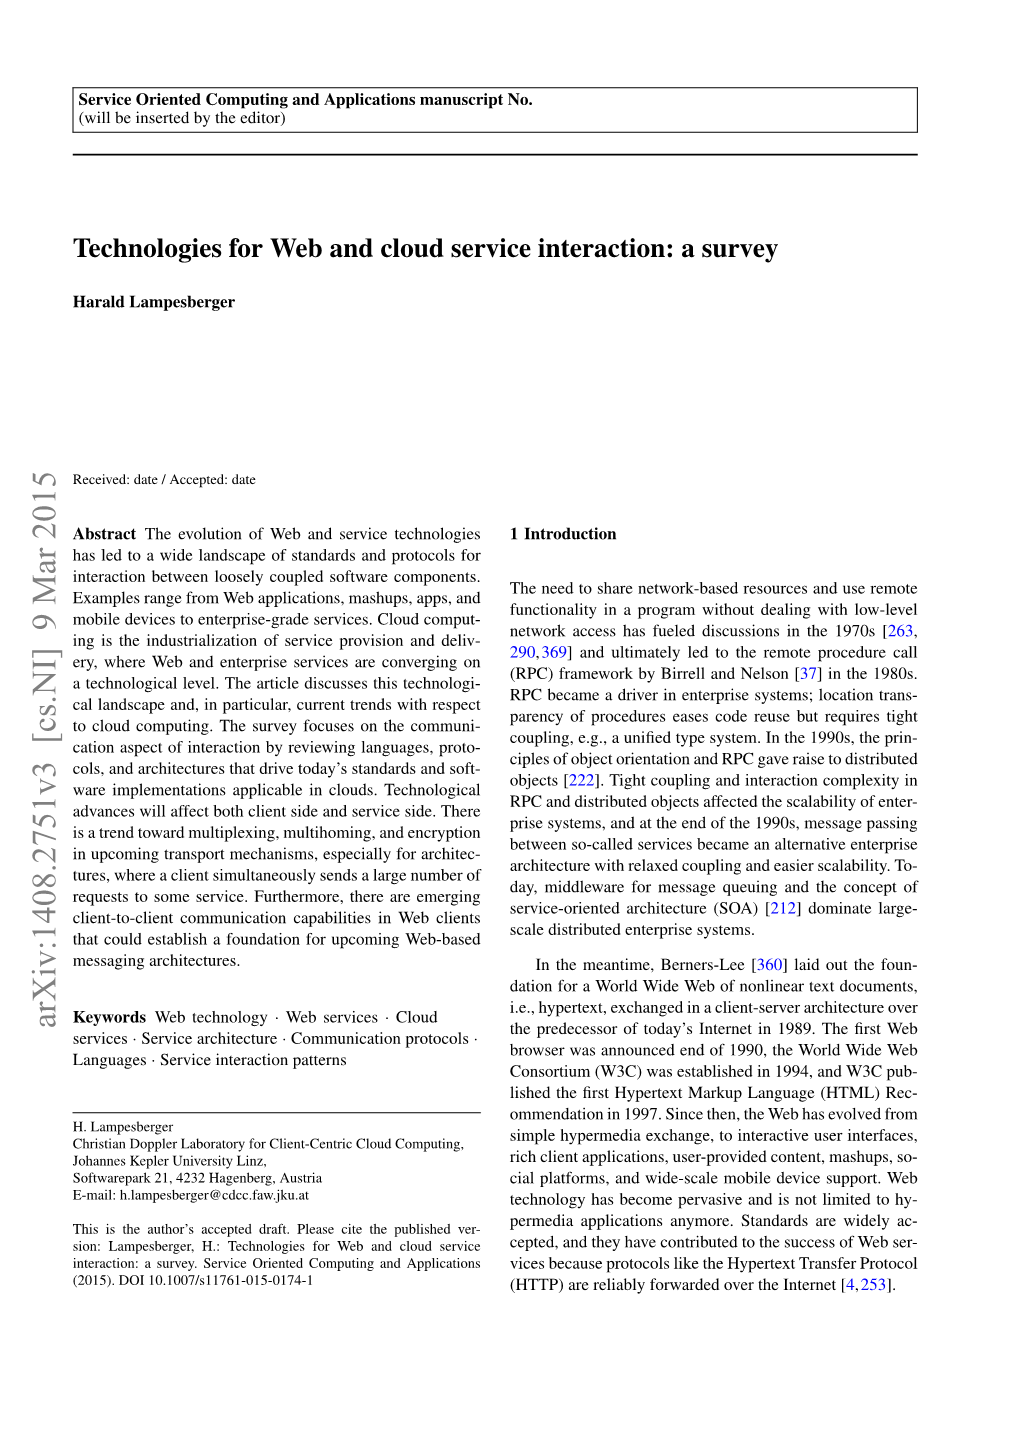 Technologies for Web and Cloud Service Interaction: a Survey